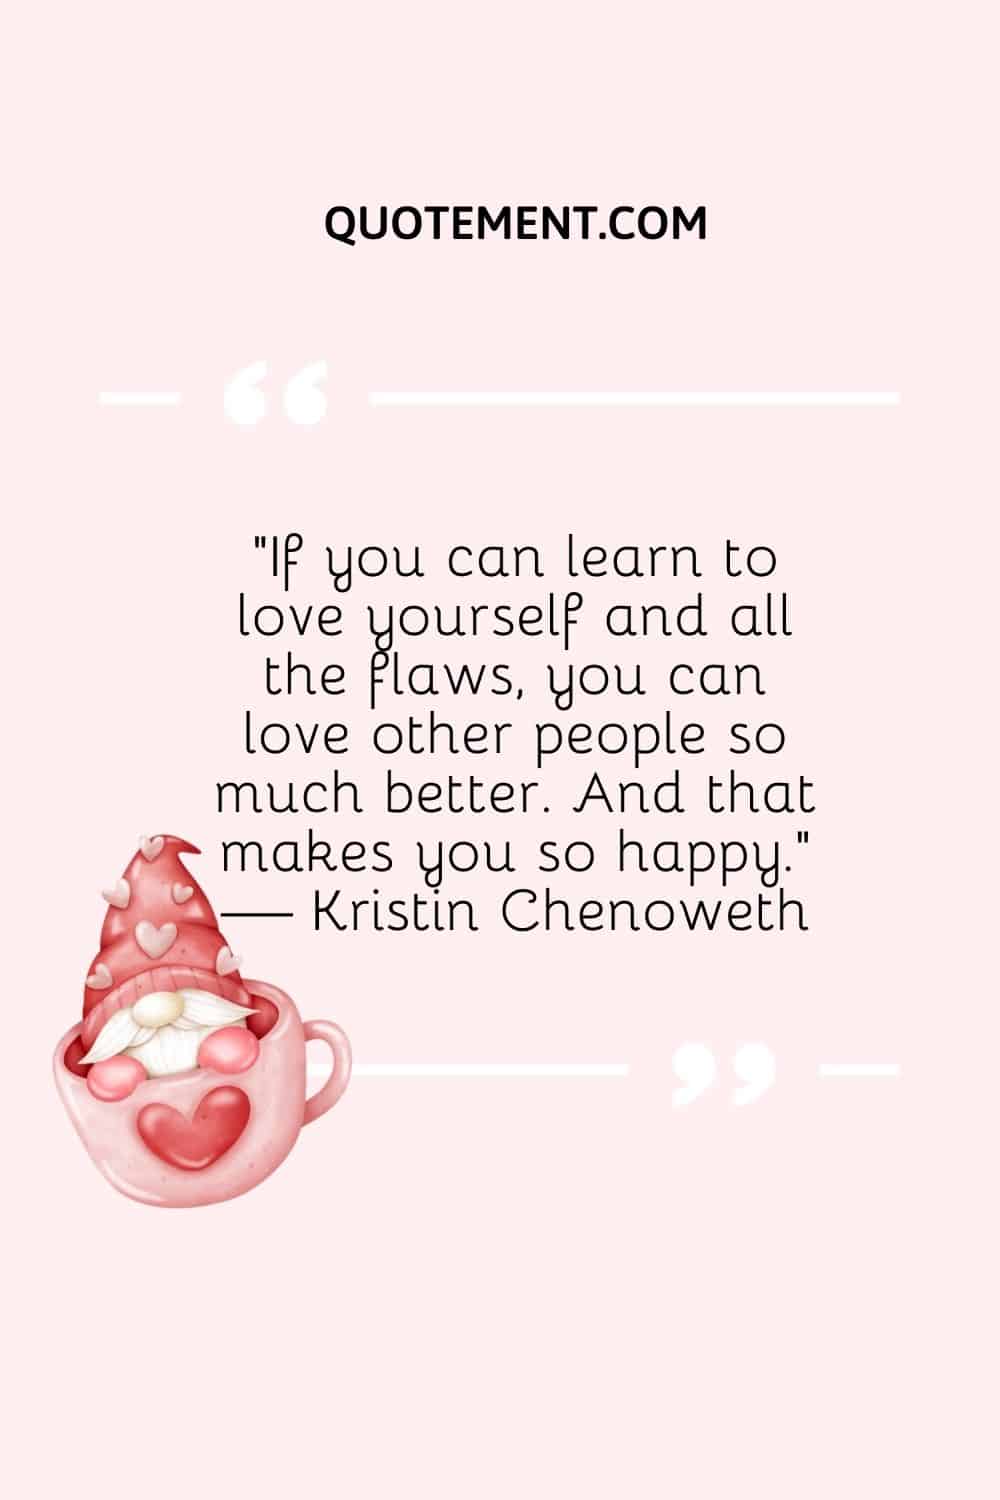 “If you can learn to love yourself and all the flaws, you can love other people so much better. And that makes you so happy.” — Kristin Chenoweth